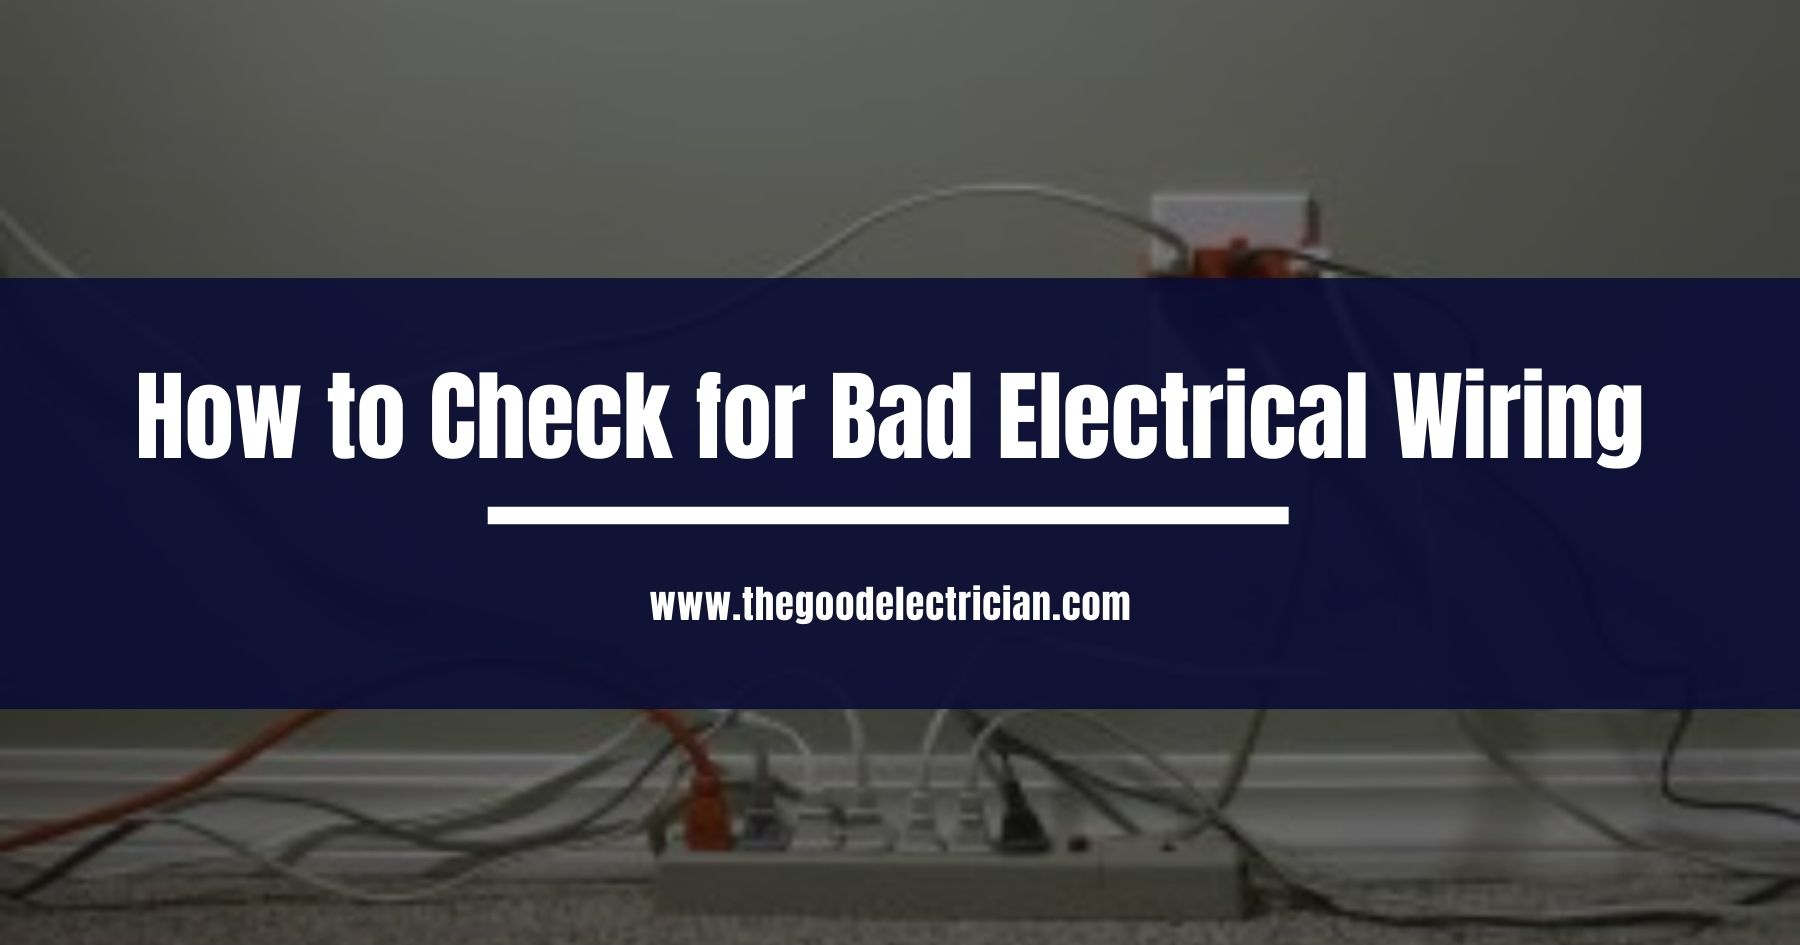 You are currently viewing How to Check for Bad Electrical Wiring